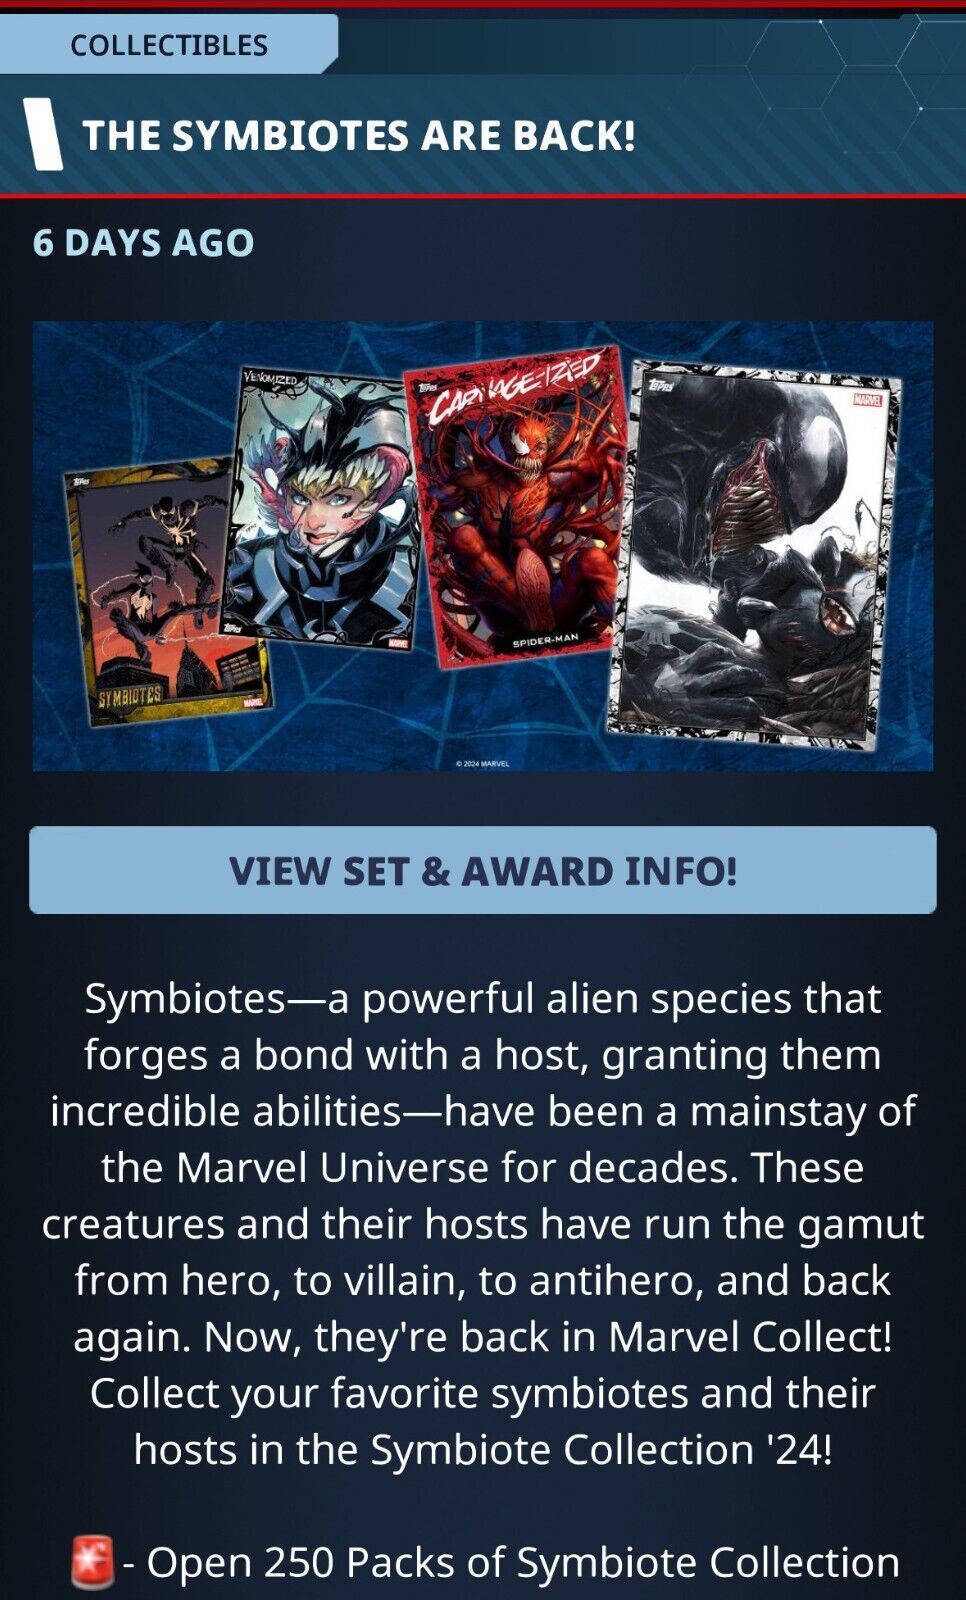 SYMBIOTE COLLECTION '24 SR/RARE+UNC 114 CARD SET-TOPPS MARVEL COLLECT DIGITAL